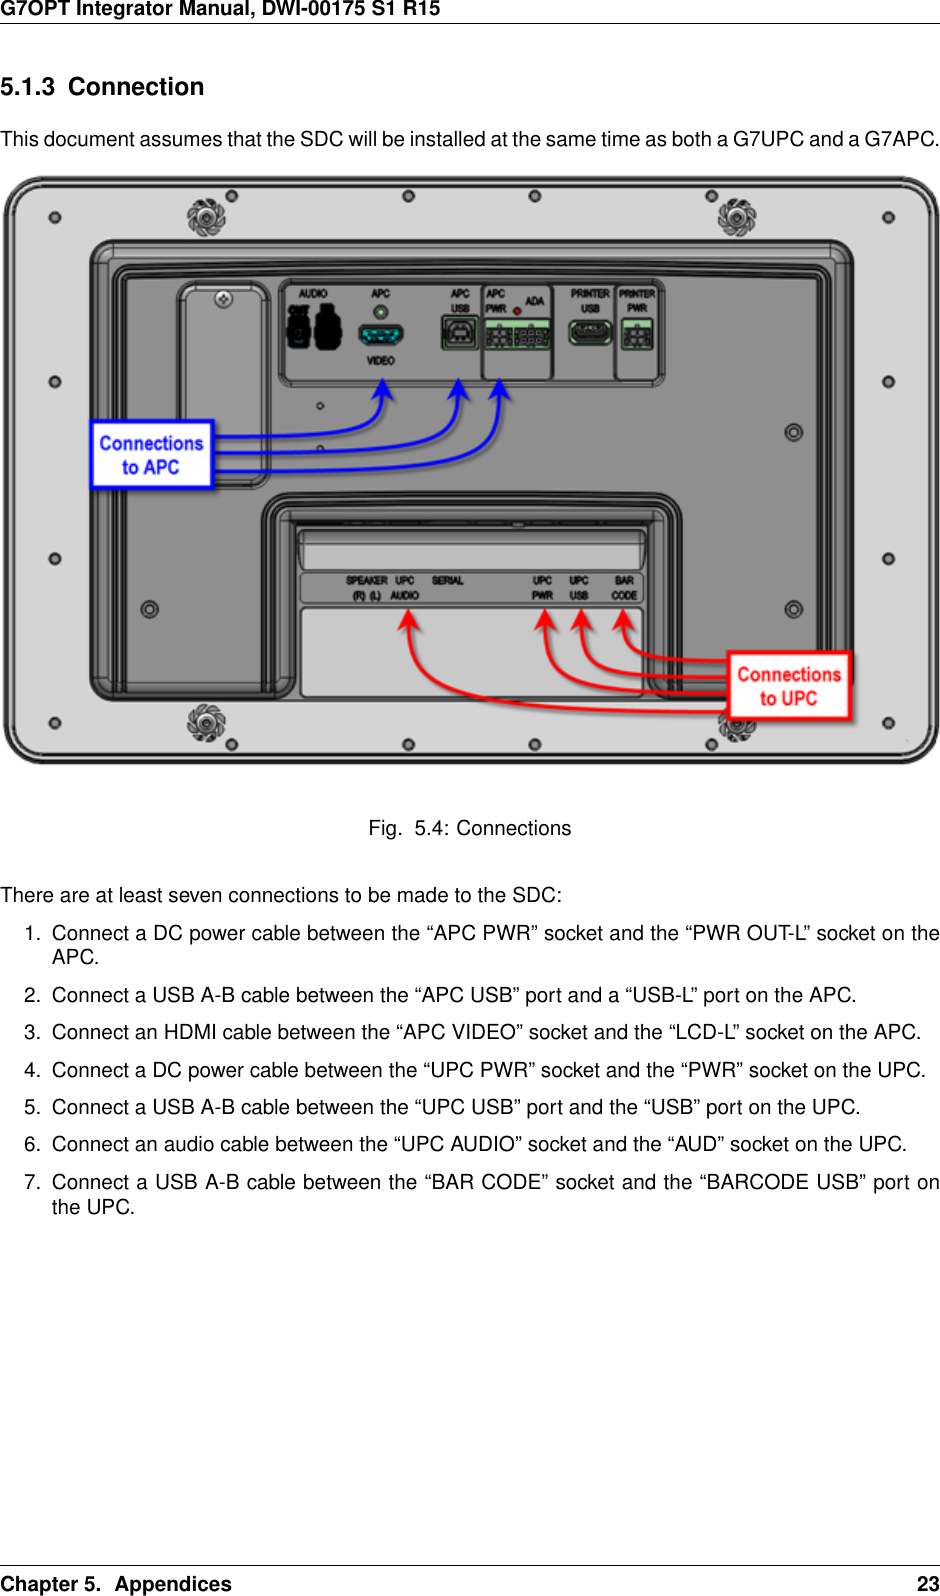 G7OPT Integrator Manual, DWI-00175 S1 R155.1.3 ConnectionThis document assumes that the SDC will be installed at the same time as both a G7UPC and a G7APC.Fig. 5.4: ConnectionsThere are at least seven connections to be made to the SDC:1. Connect a DC power cable between the “APC PWR” socket and the “PWR OUT-L” socket on theAPC.2. Connect a USB A-B cable between the “APC USB” port and a “USB-L” port on the APC.3. Connect an HDMI cable between the “APC VIDEO” socket and the “LCD-L” socket on the APC.4. Connect a DC power cable between the “UPC PWR” socket and the “PWR” socket on the UPC.5. Connect a USB A-B cable between the “UPC USB” port and the “USB” port on the UPC.6. Connect an audio cable between the “UPC AUDIO” socket and the “AUD” socket on the UPC.7. Connect a USB A-B cable between the “BAR CODE” socket and the “BARCODE USB” port onthe UPC.Chapter 5. Appendices 23